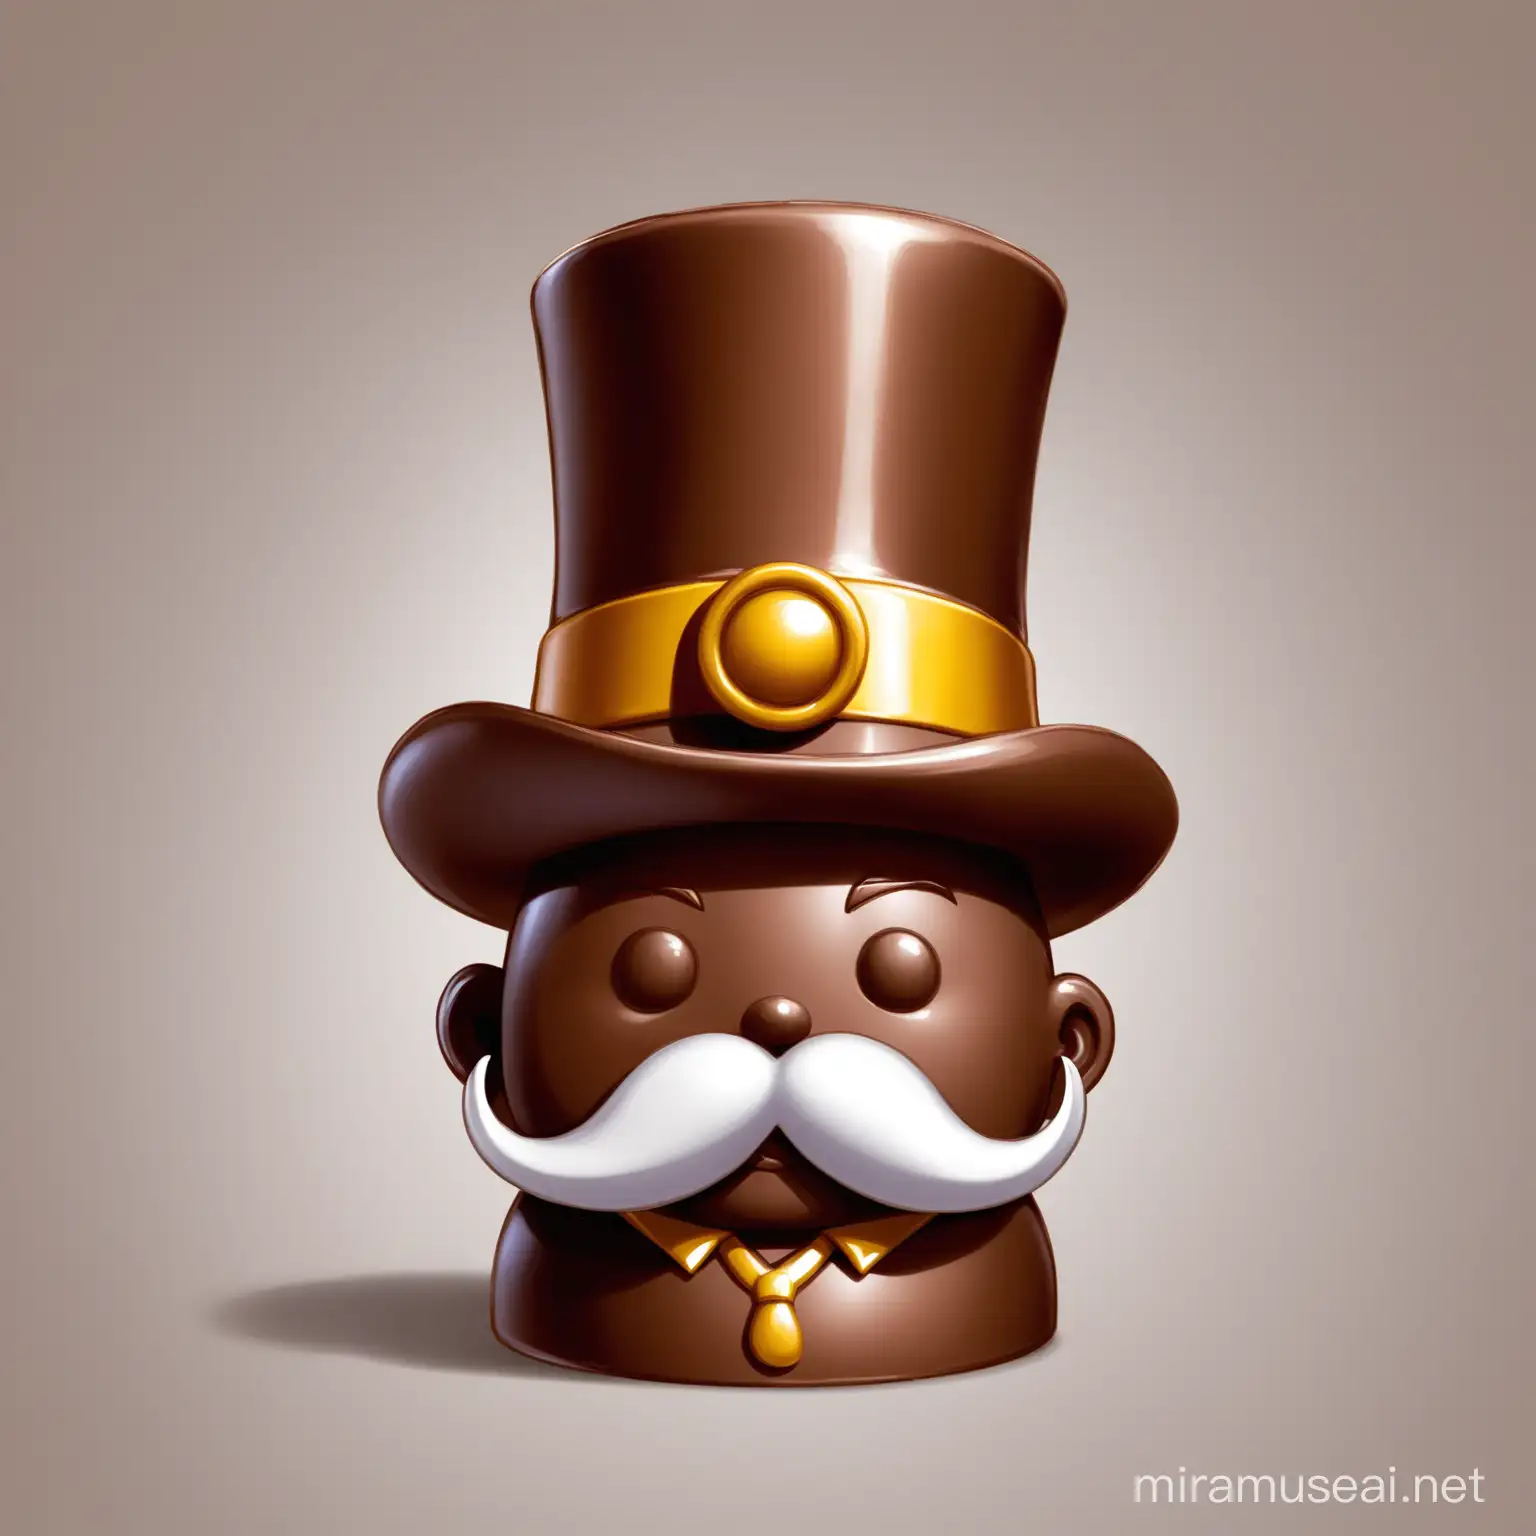 Make a chocolate figure that wears a hat, monacle and moustache